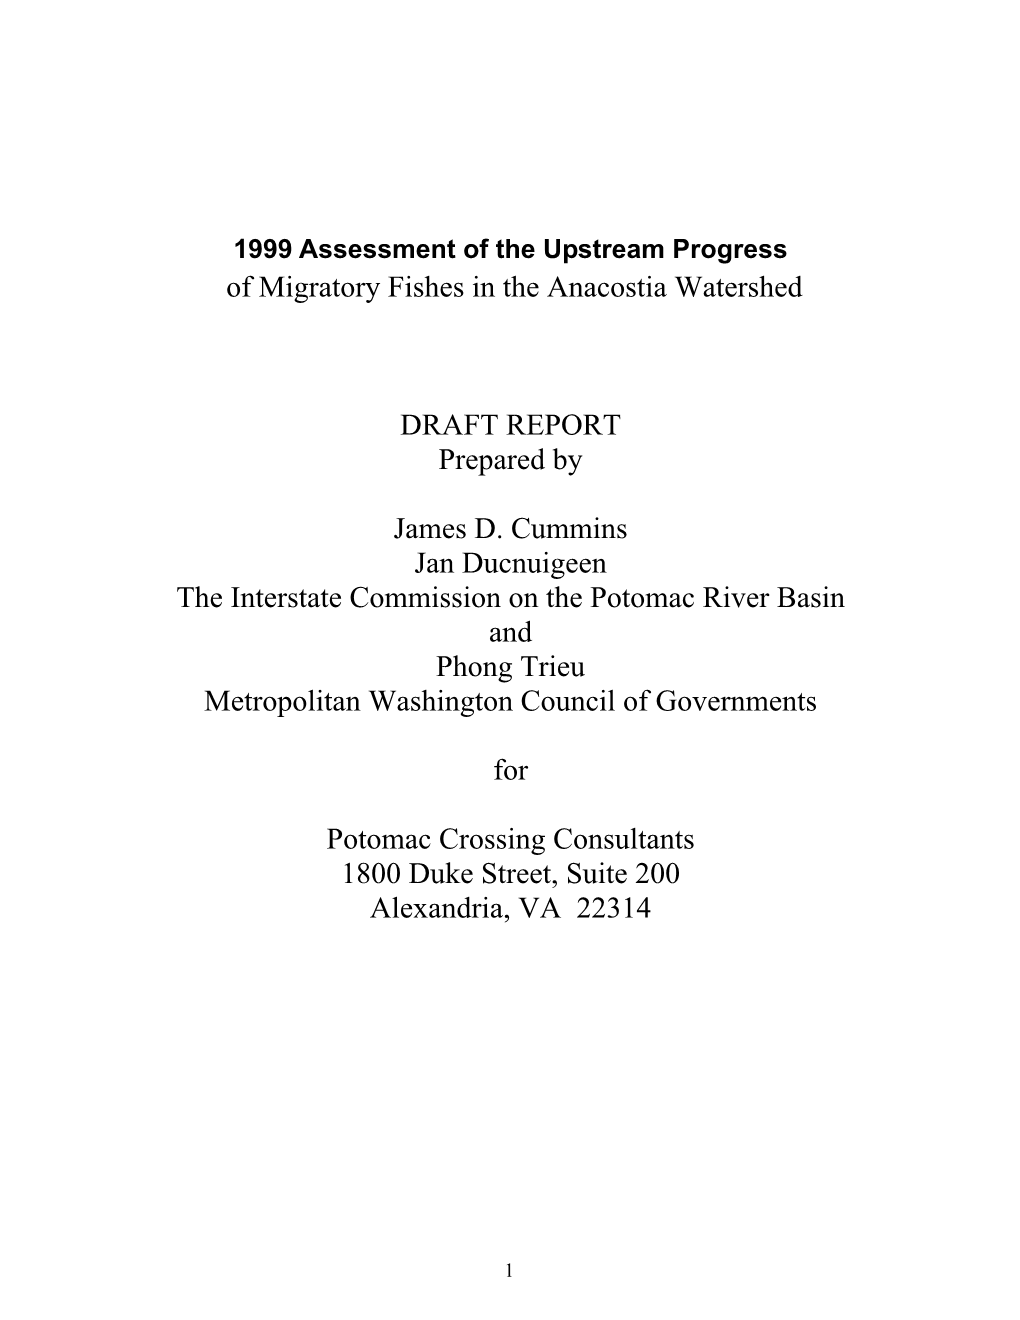 1999 Assessment of the Upstream Progress of Migratory Fishes in the Anacostia Watershed